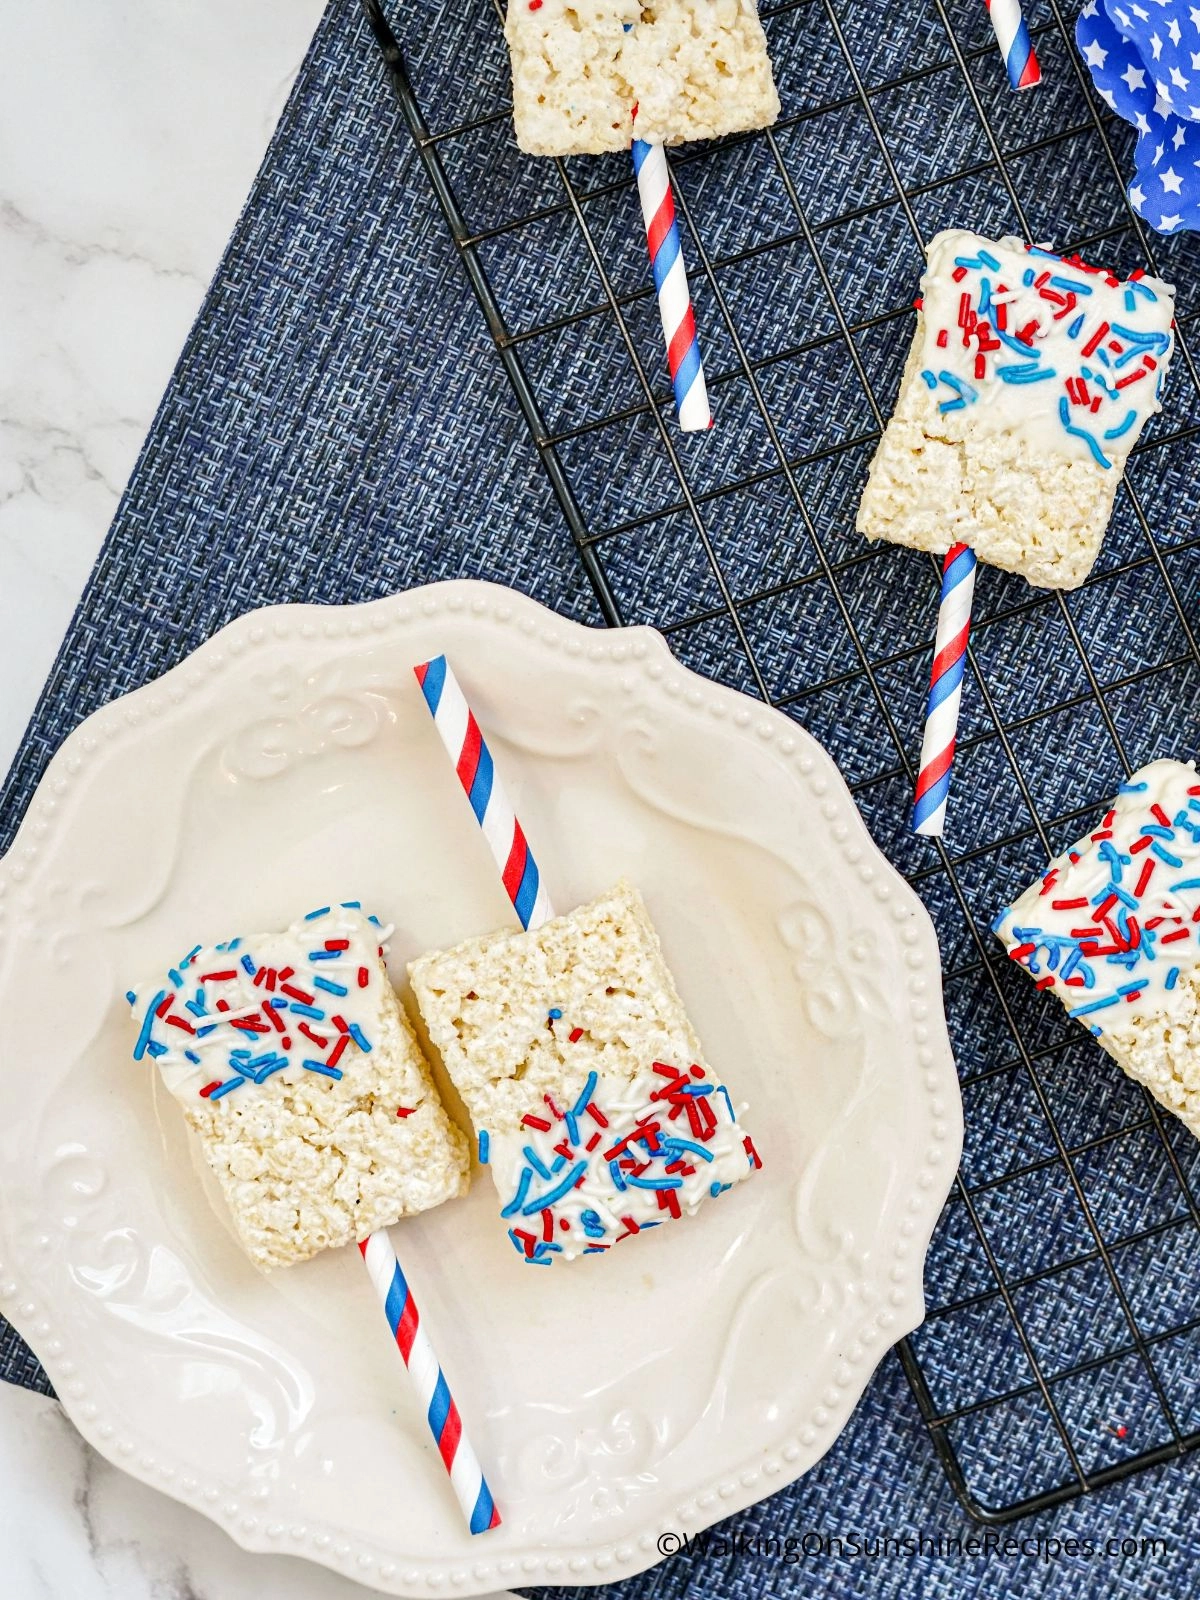 Add patriotic red white and blue sprinkles.